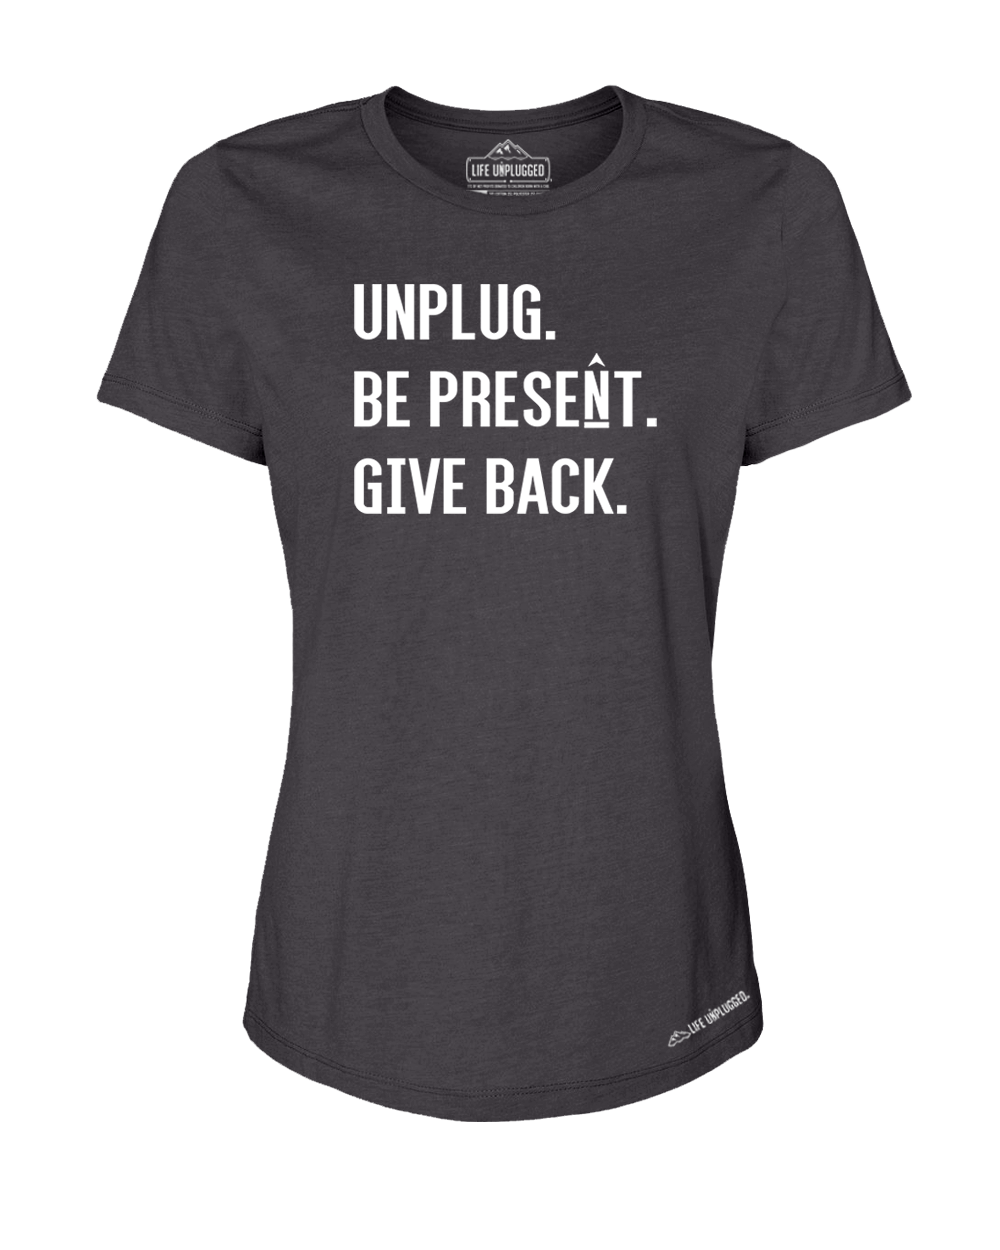 UNPLUG. BE PRESENT. GIVE BACK Premium Women's Relaxed Fit Polyblend T-Shirt